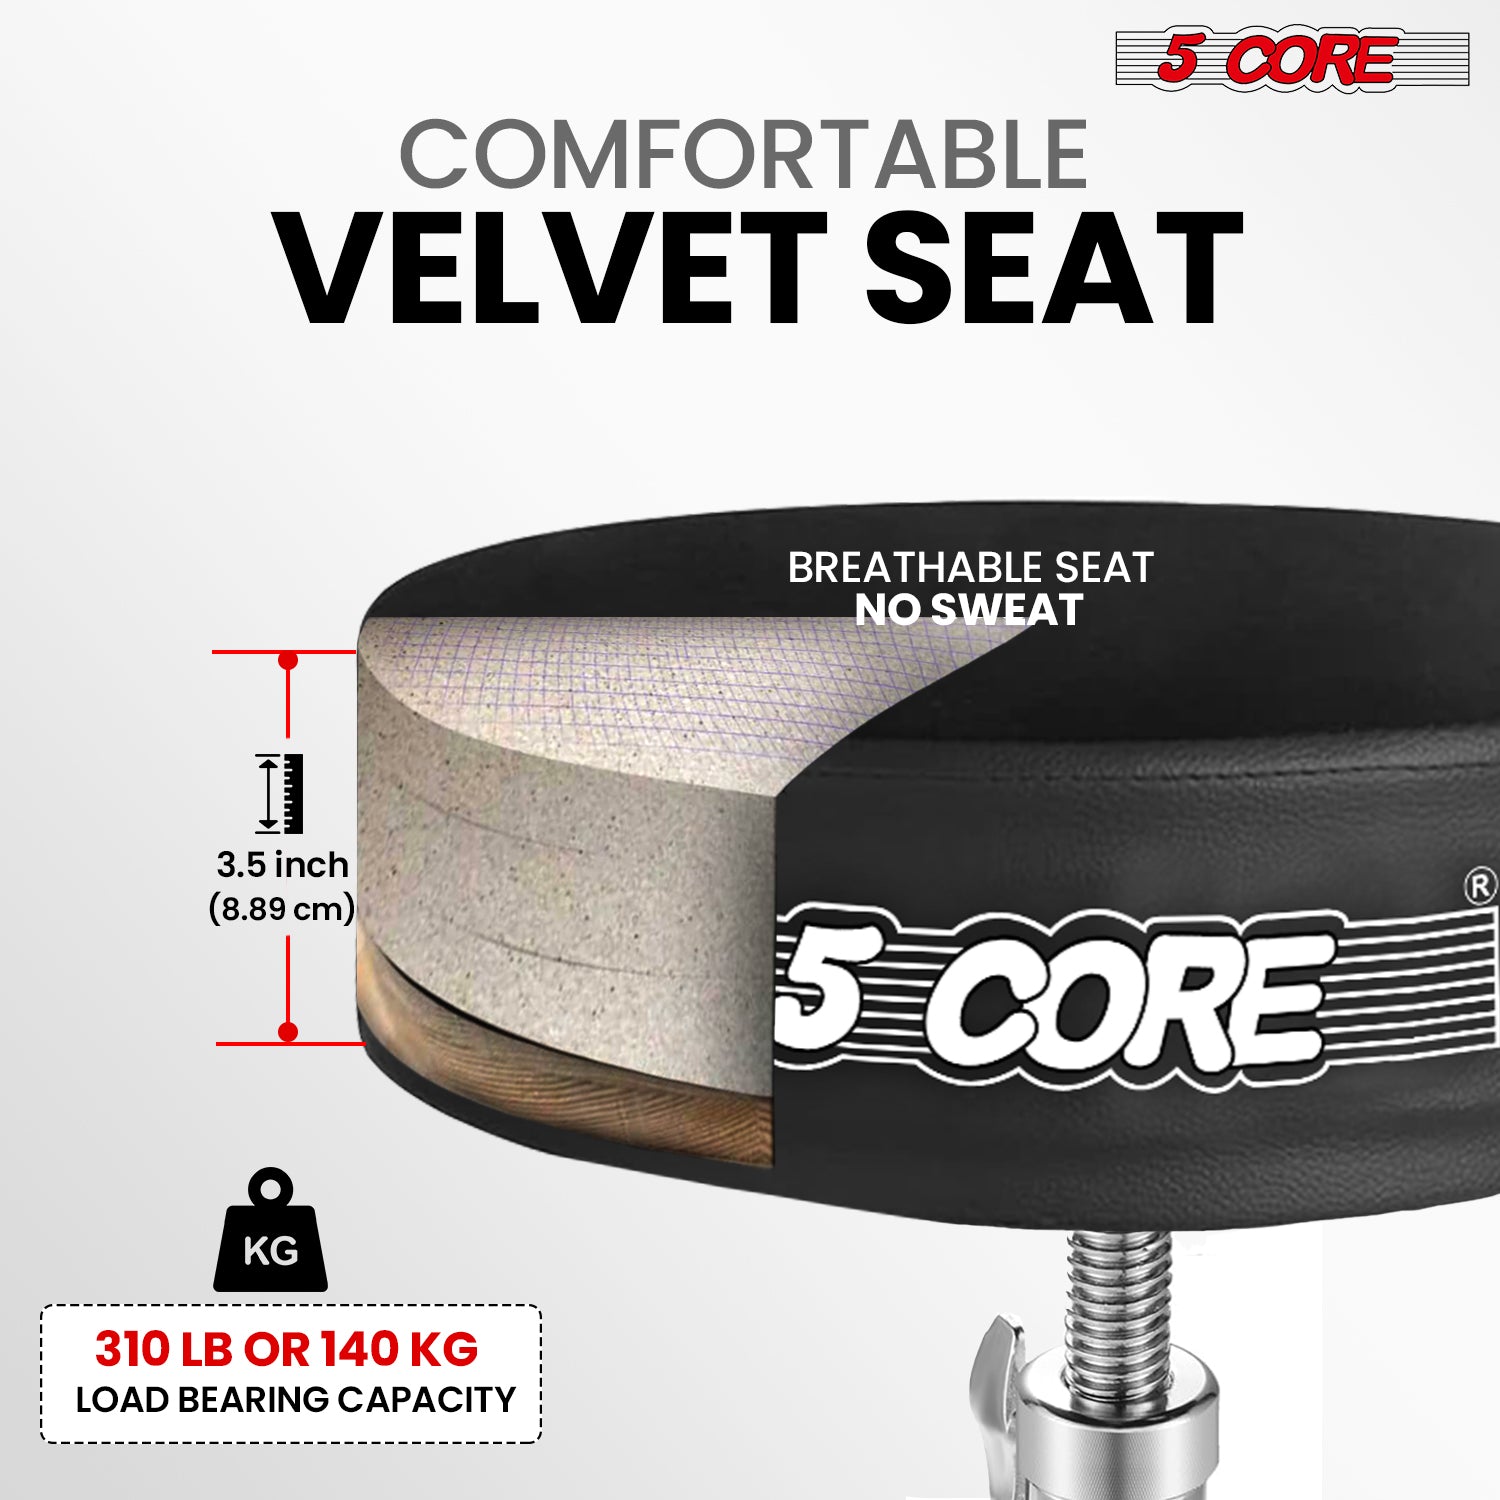 5 Core drum throne with comfortable padded seat, ideal for drummers and guitarists